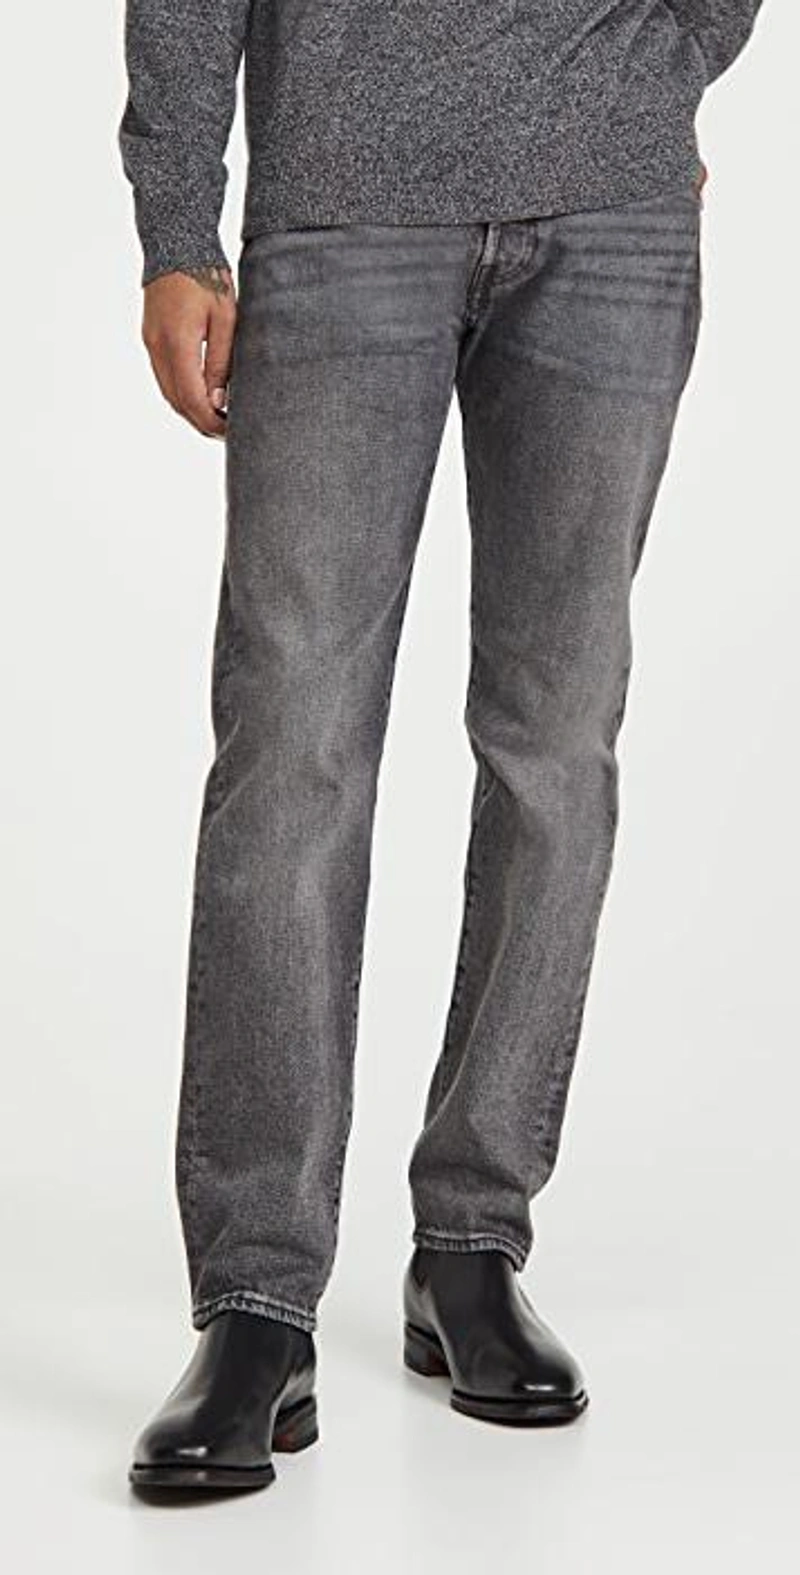 shopbop.com's Posts | 搭配: Levi's 501 93 Straight Leg Jeans；Theory Hilles Cashmere Crewneck Sweater In Dusty Orchid